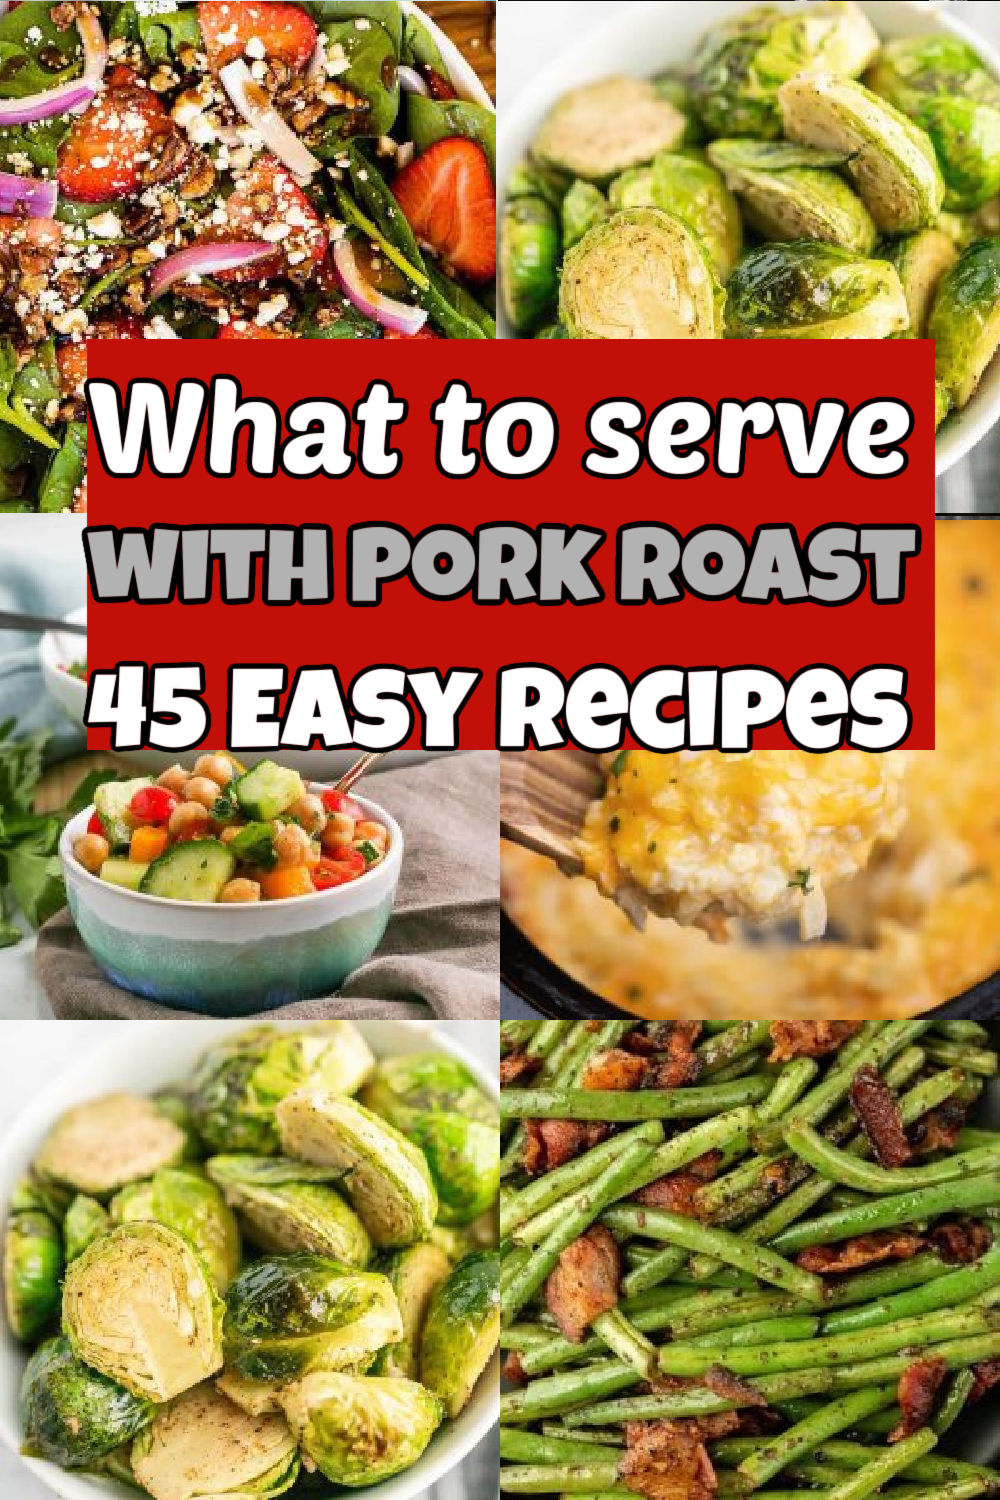 If you’re wondering what to serve with pork roast, here are 45 easy recipes you can try at home. These tasty sides for pork roast will make it a complete meal for a delicious dinner. Find sides that pair perfectly with pork roast. #eatingonadime #whattoservewithporkroast #easyporksides